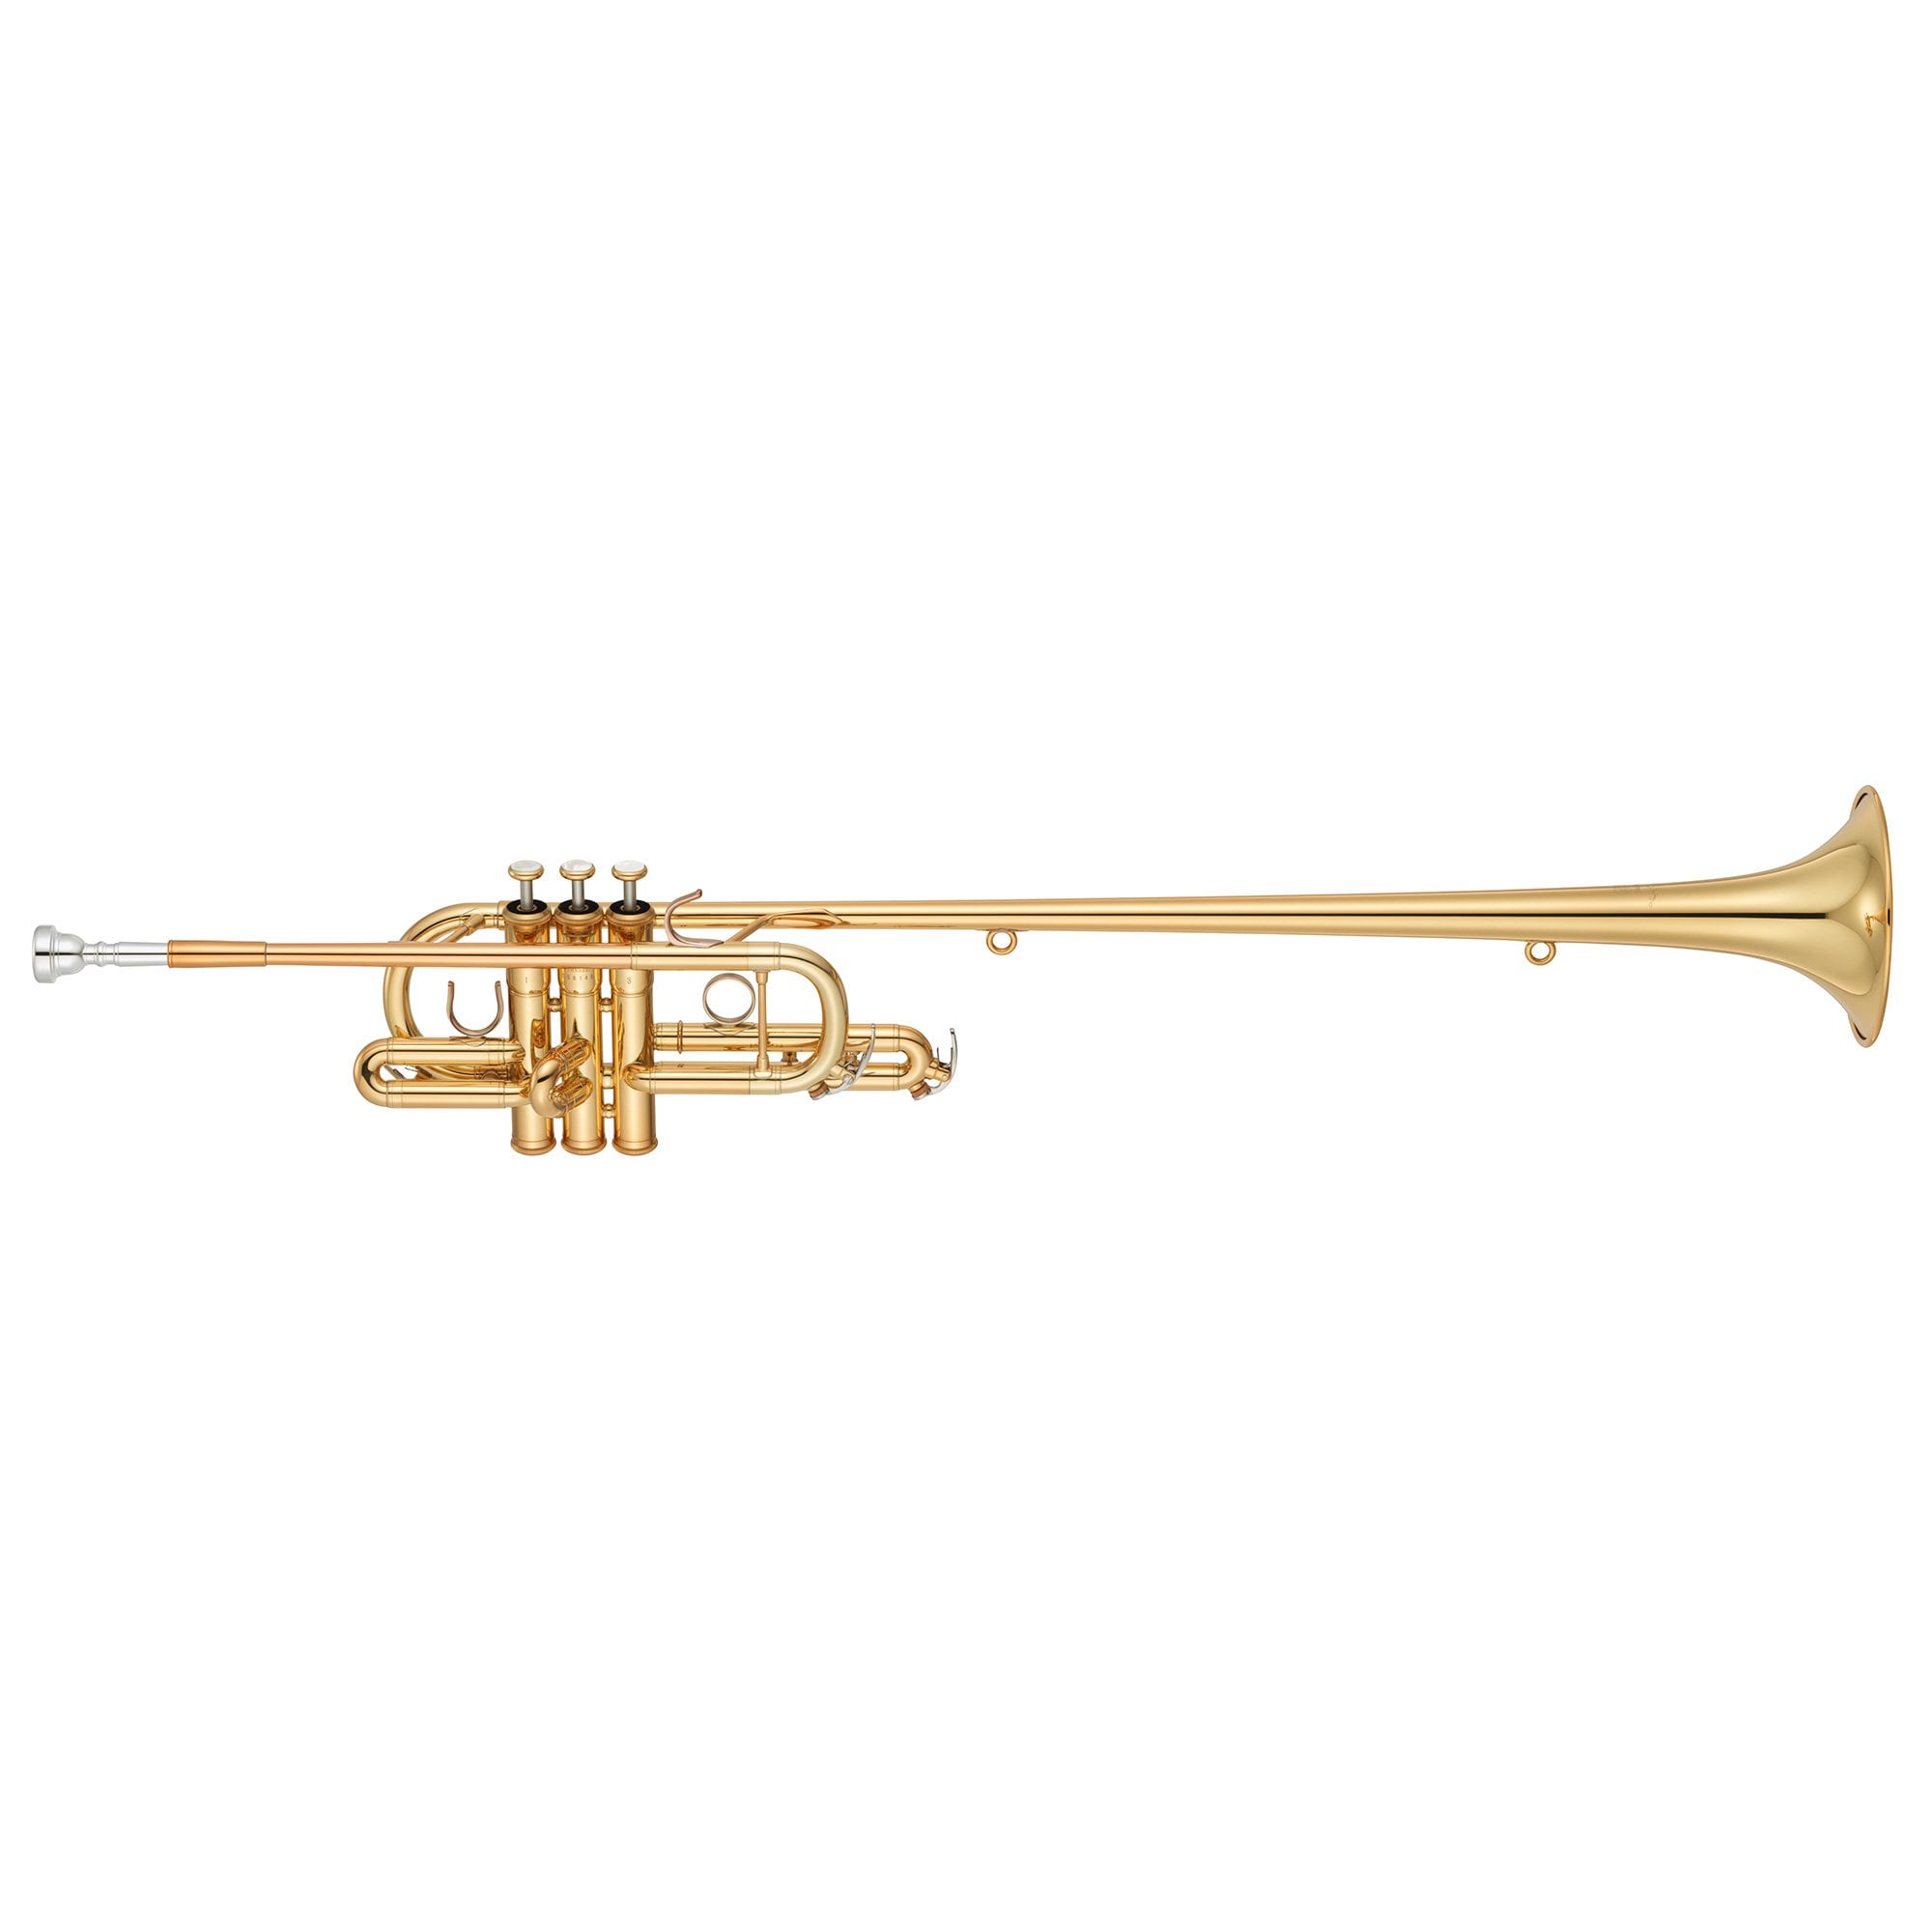 YTR-6335F - Overview - Herald Trumpets - Trumpets - Brass